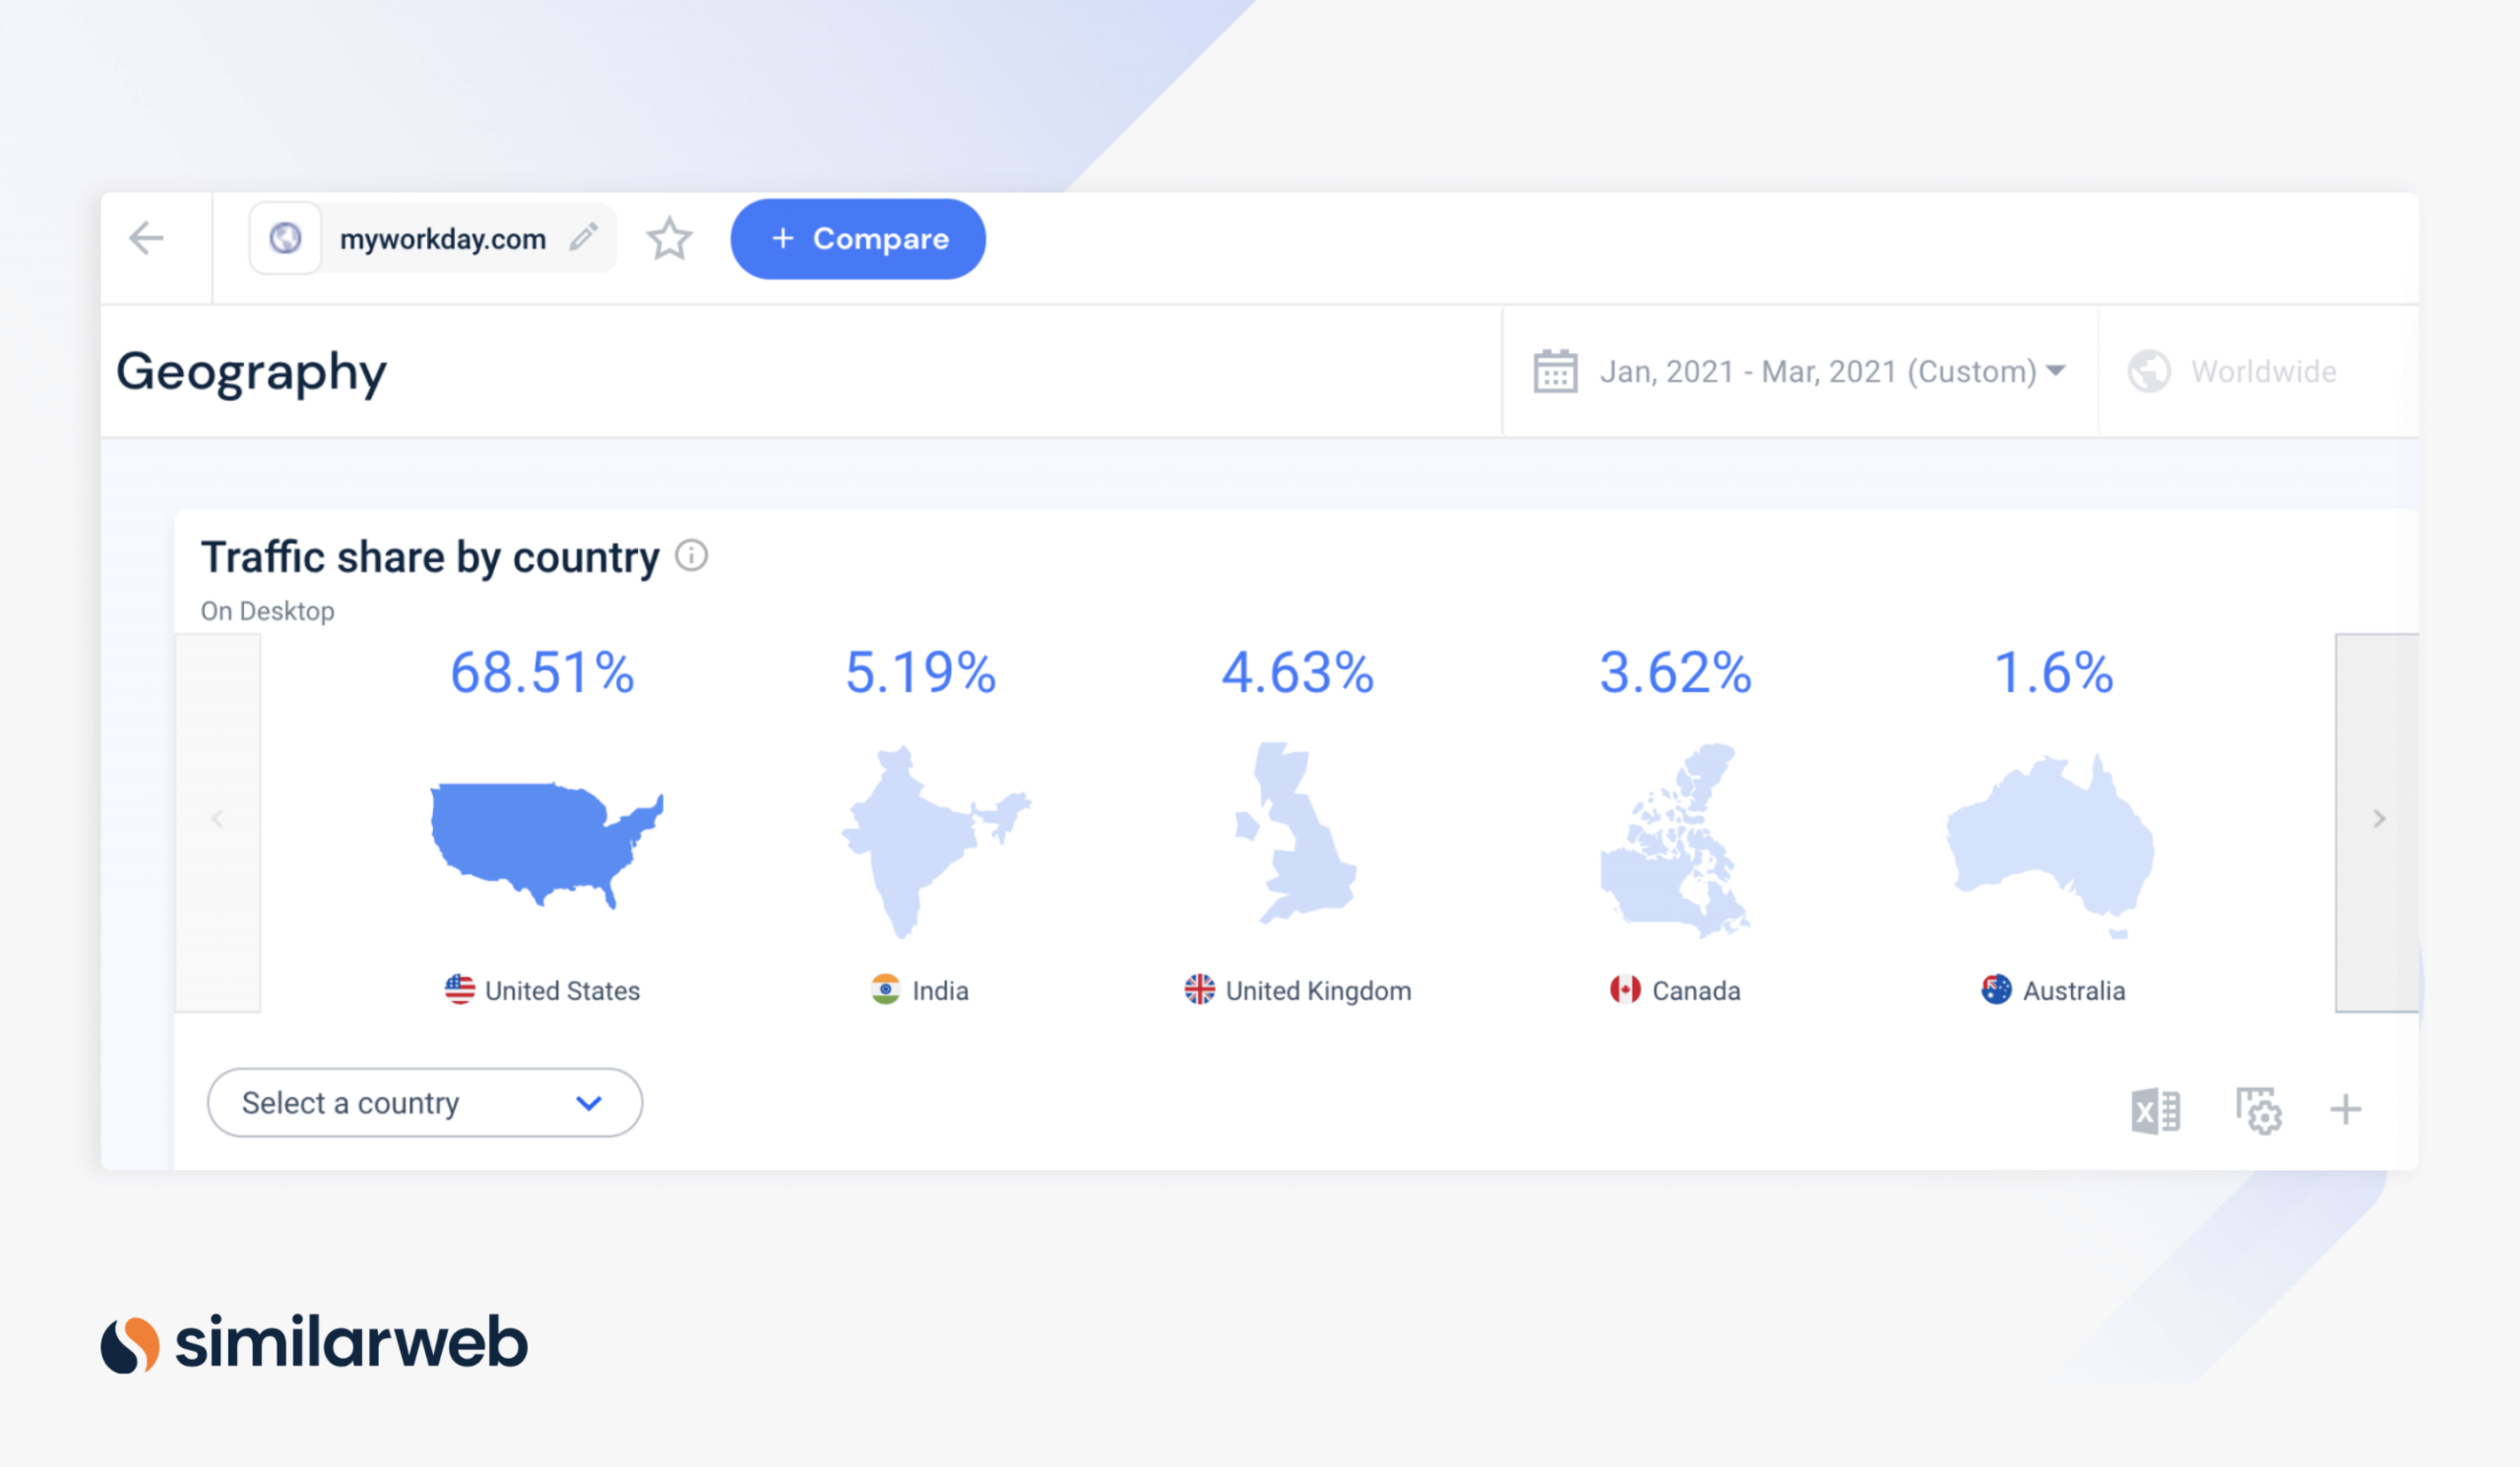 myworkday.com traffic share by country